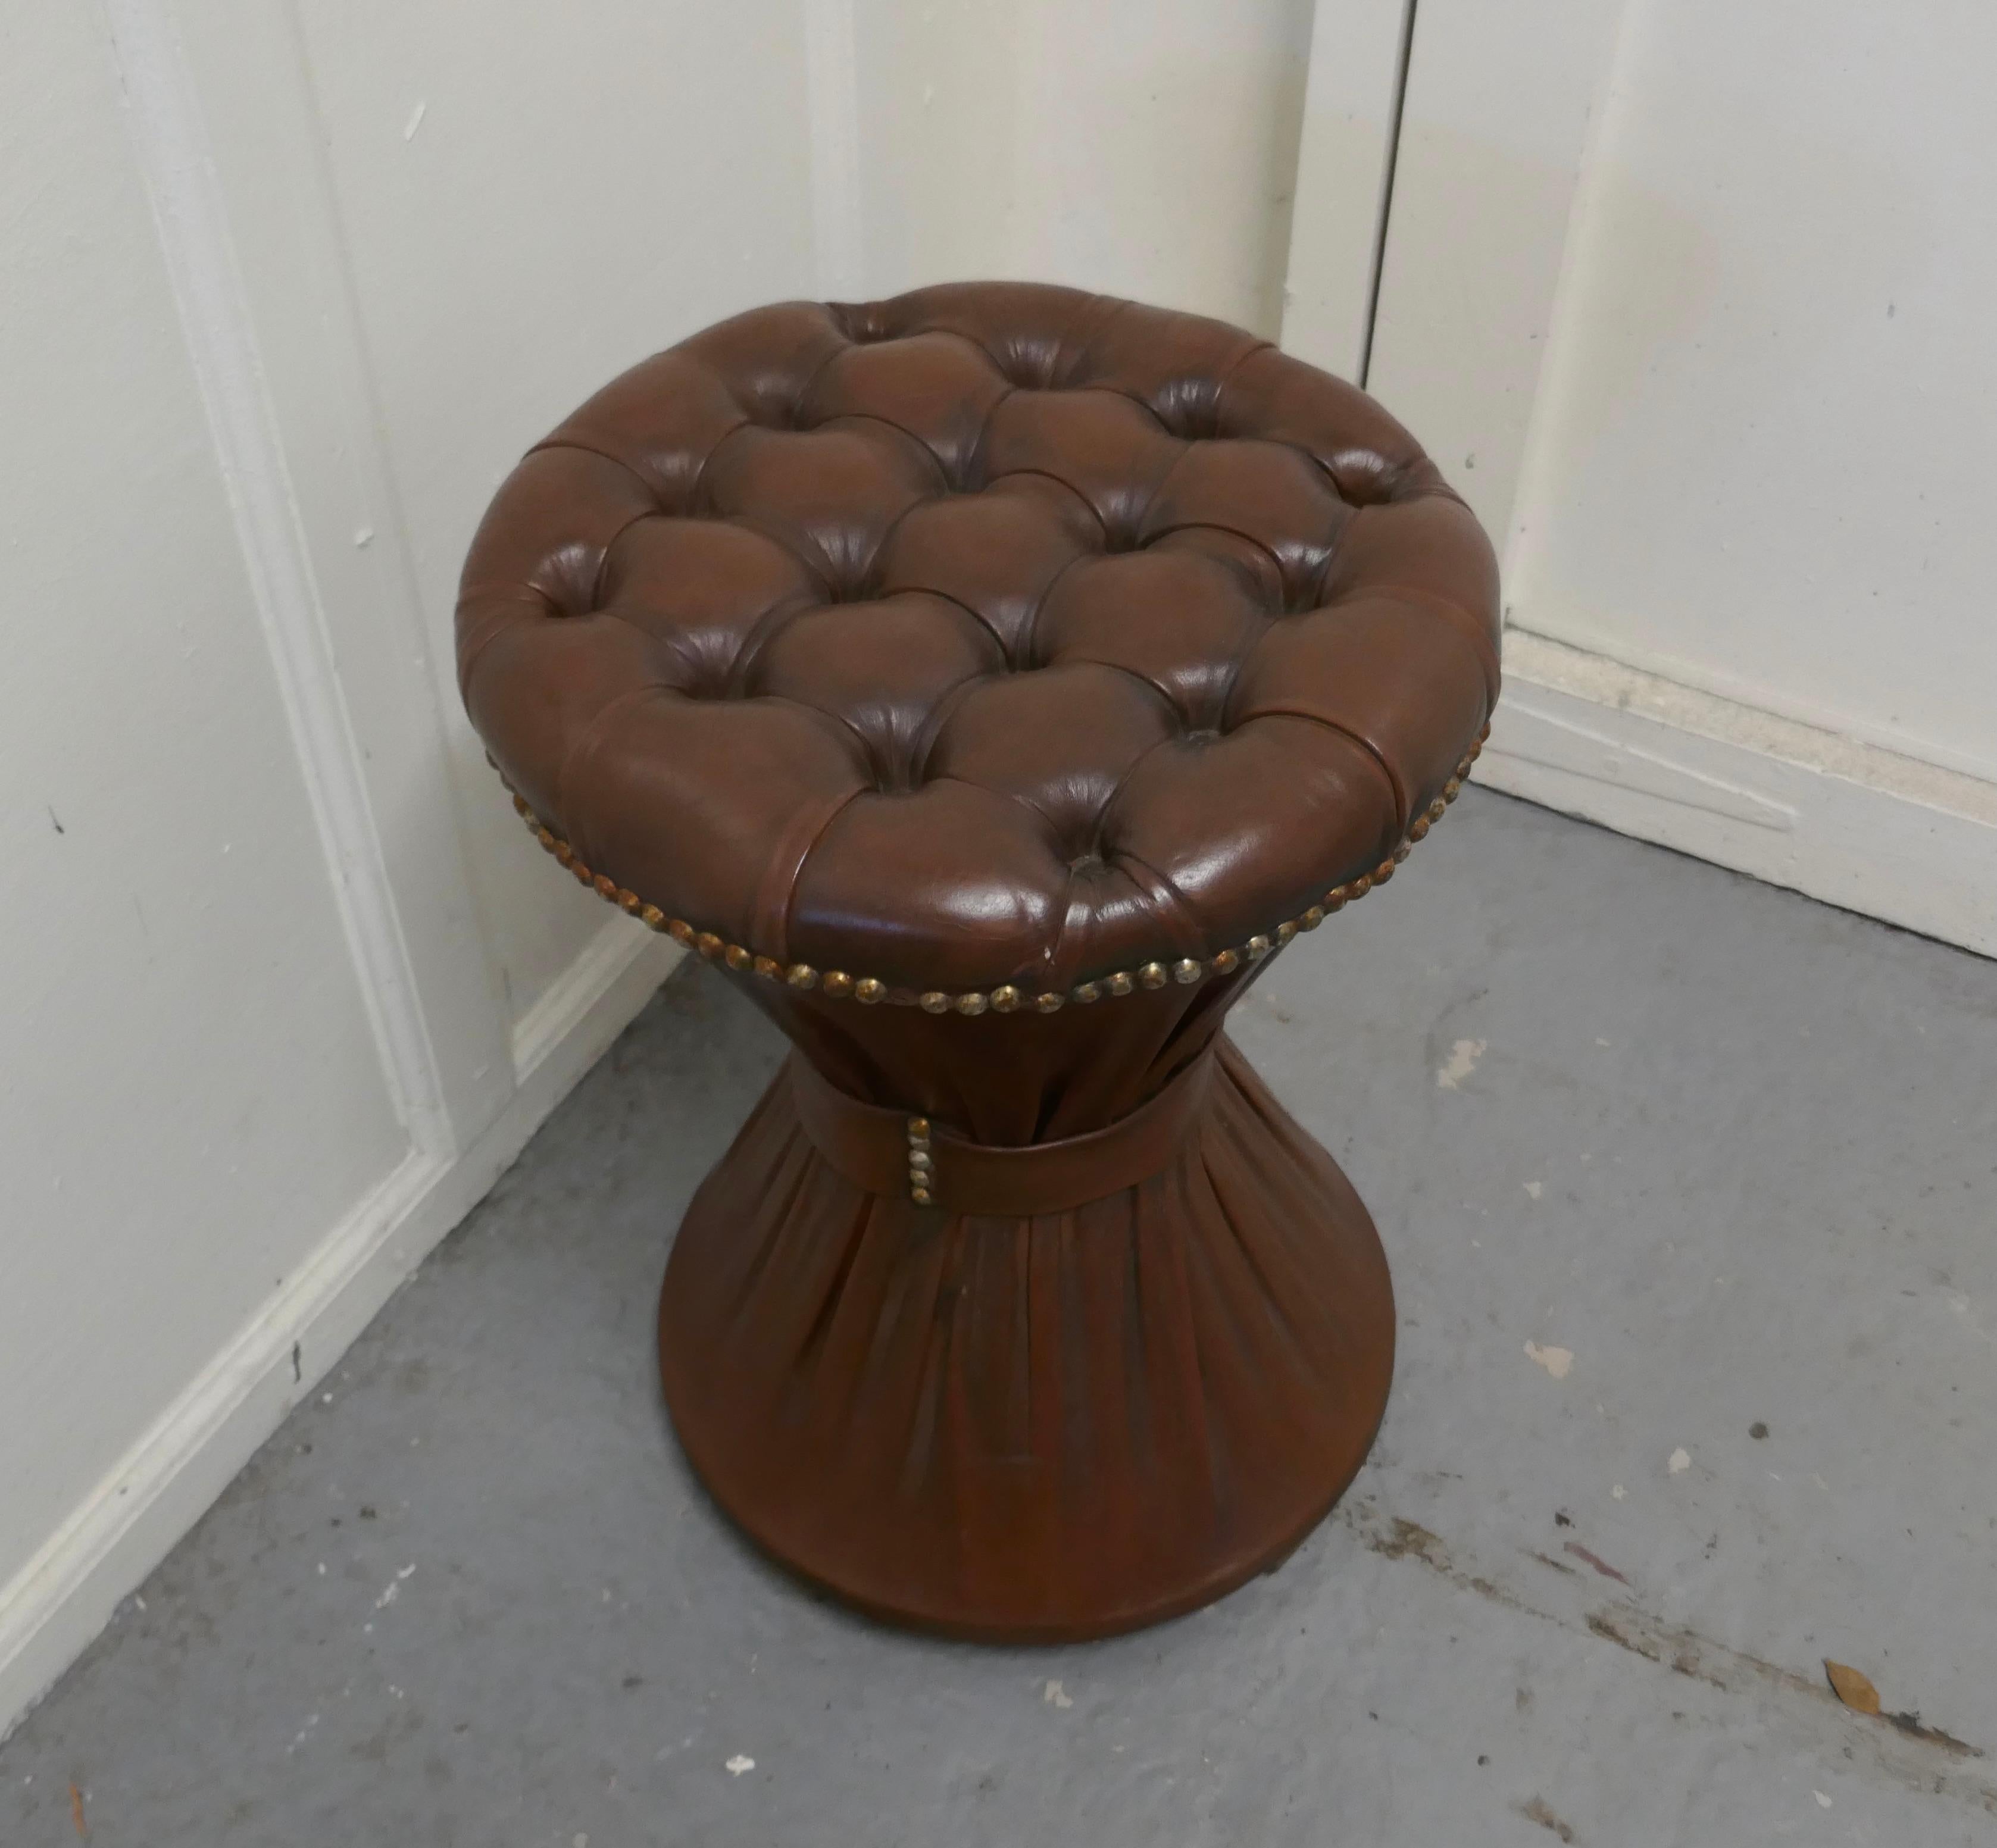 Deeply Buttoned Tam Tam leather stool 

This is a good Sturdy stool it has a deeply buttoned top and the leather is gathered at the mid point of the base forming the classic Tam Tam shape

The stool is upholstered in a brown Leather with brass